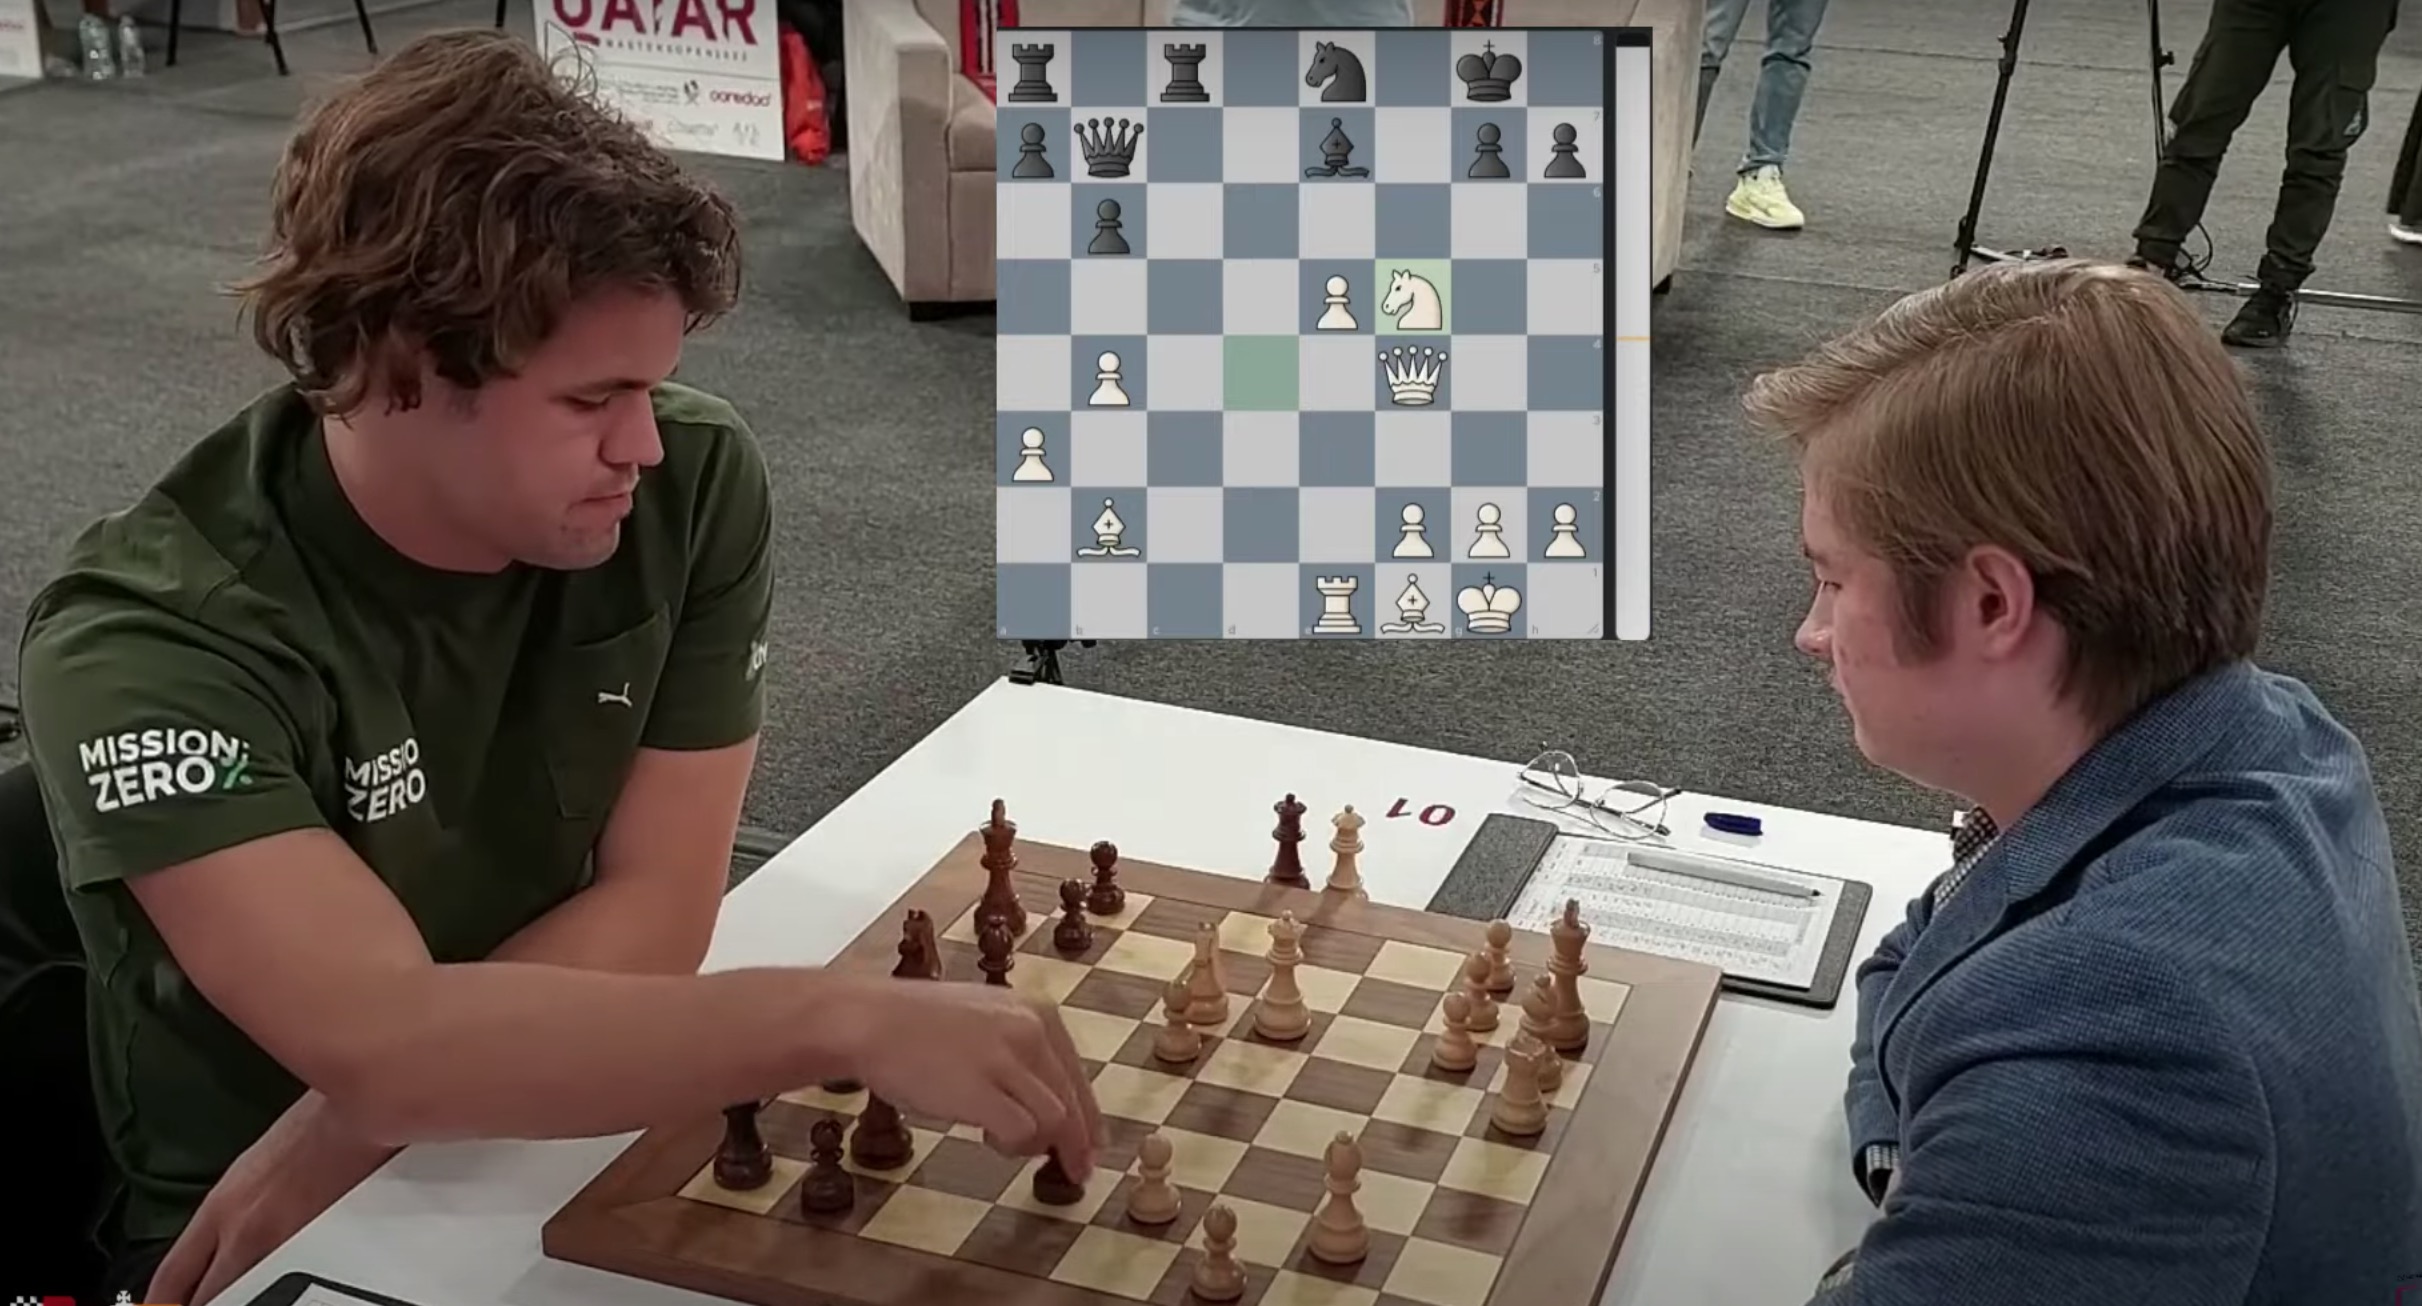 Carlsen has already lost at this point, and he looks visibly agitated